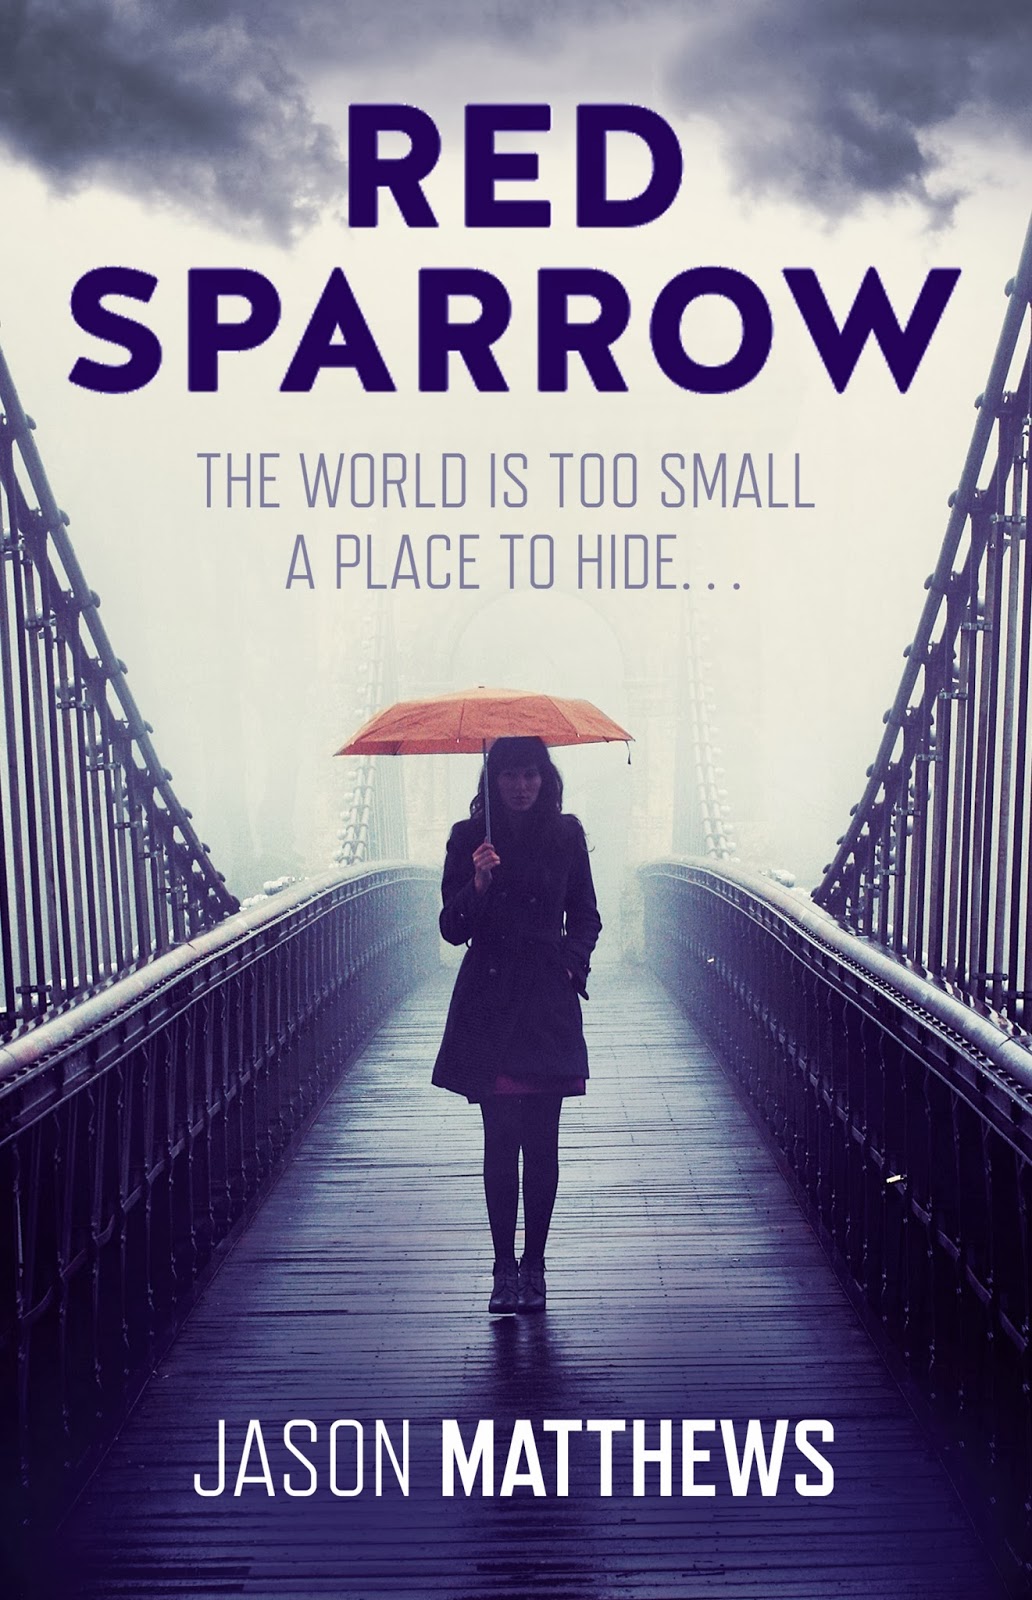 http://discover.halifaxpubliclibraries.ca/?q=title:red%20sparrow